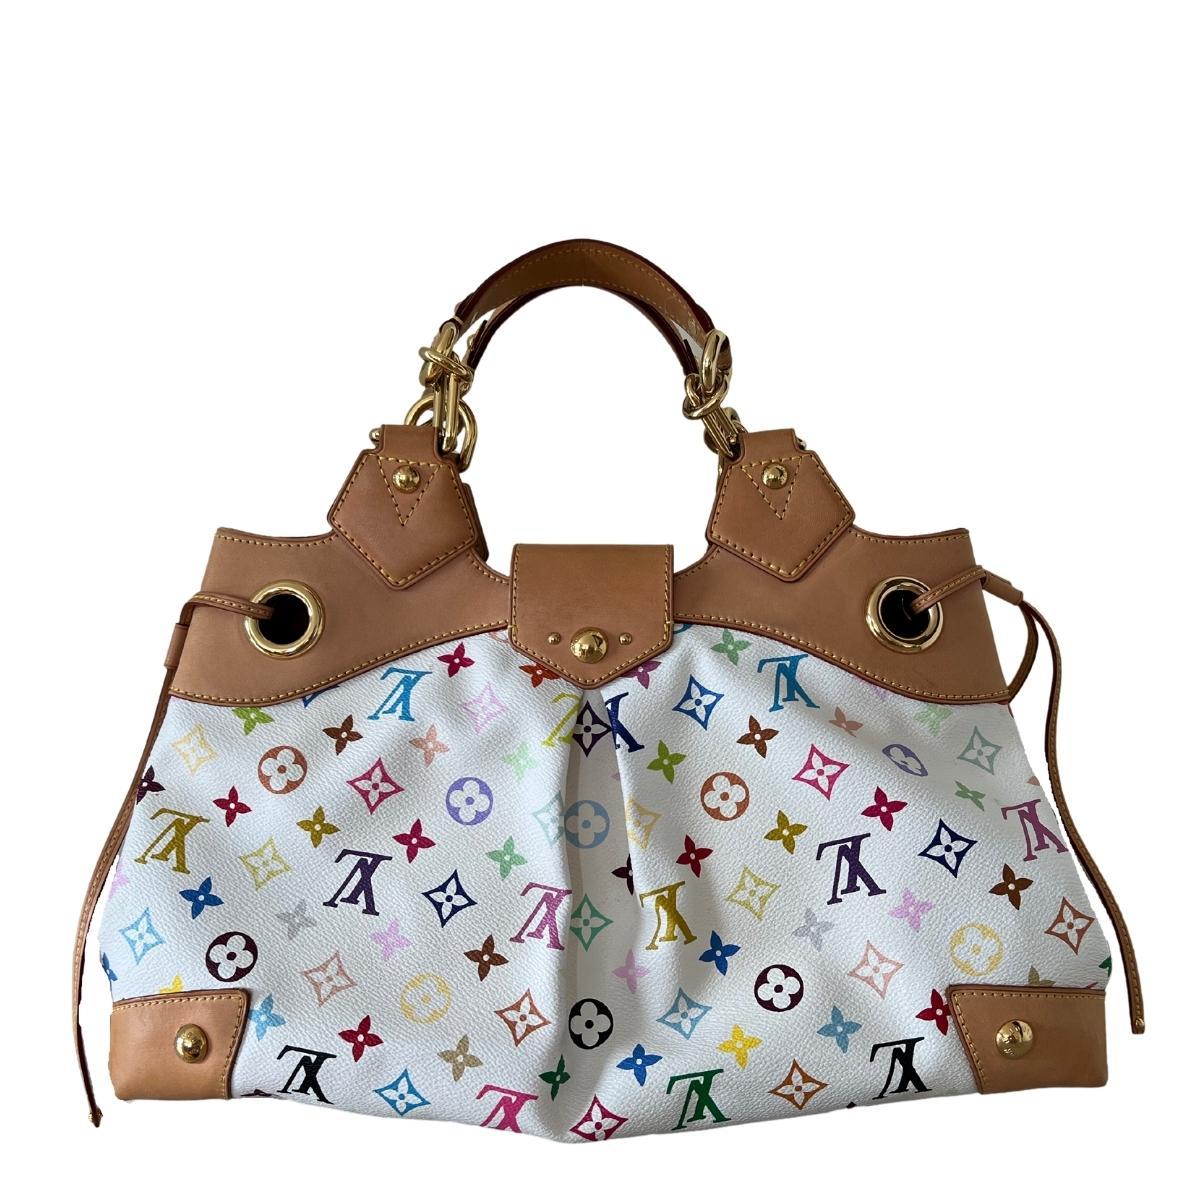 Follow us @runwaycatalog

Authentic Louis Vuitton White Multicolor Ursula

CONDITION: Very Good.  Light patina, very light wear and marking on vachetta leather,  no creasing, no structure loss, light discolouration on buckle frame. No interior